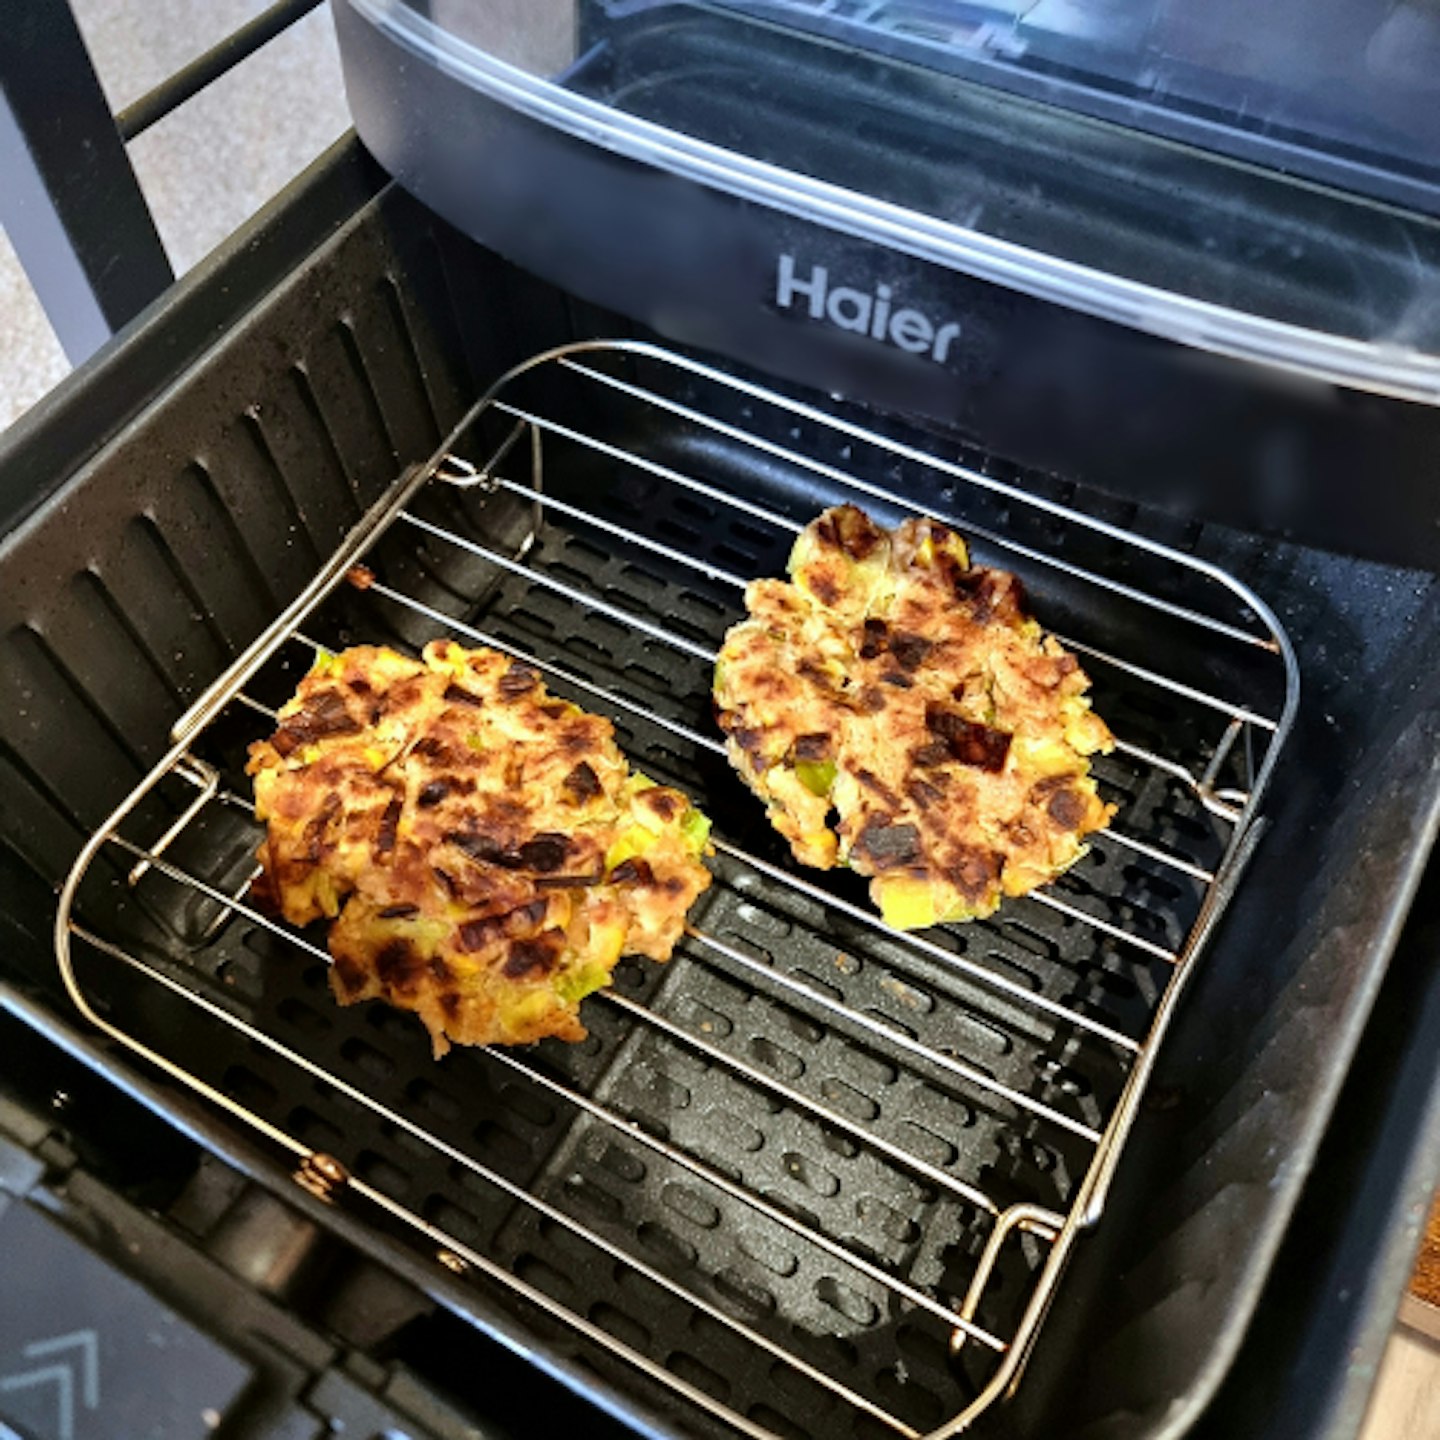 Haier Multi Air Fryer cooking sweetcorn fritters using the grill tray